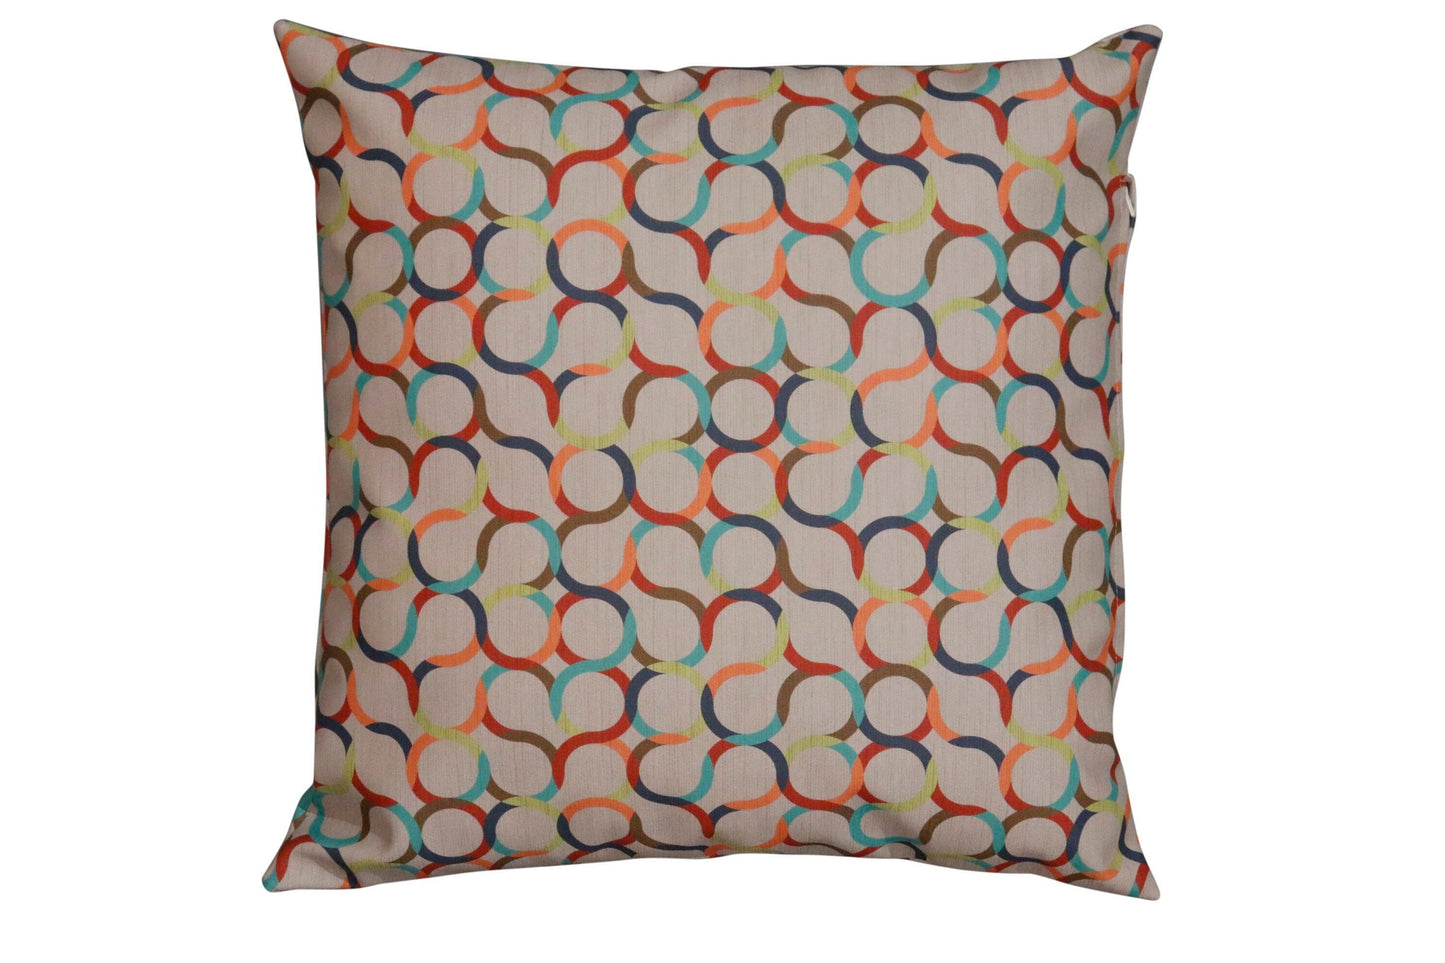 Mid century Retro made to order multicolored geometric pillows made out of vinyl. 18x18” inches